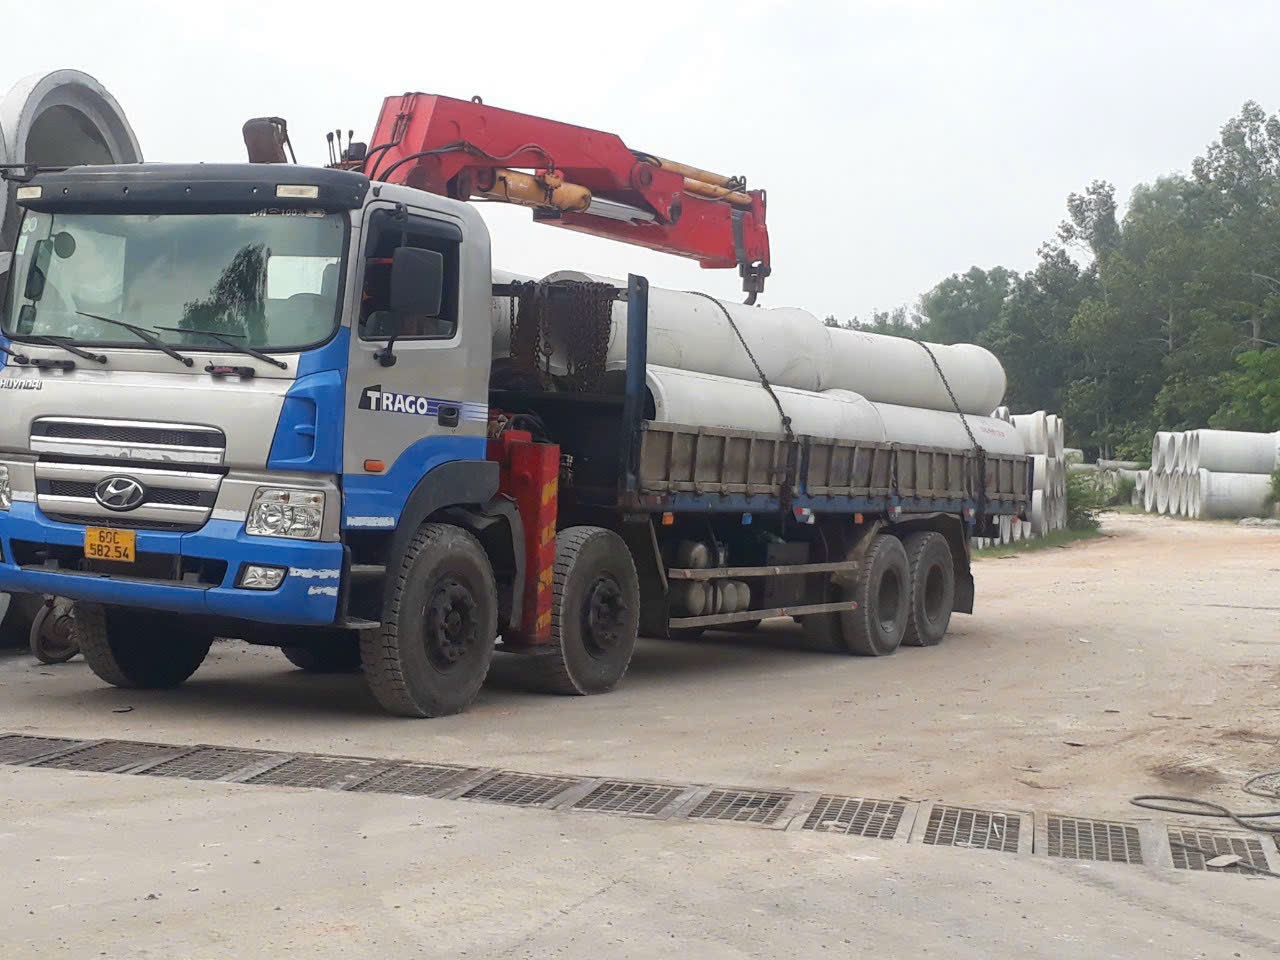 SEWER TRANSPORTATION CRANE SERVES DRAINAGE SYSTEM PROJECTS IN BINH DUONG